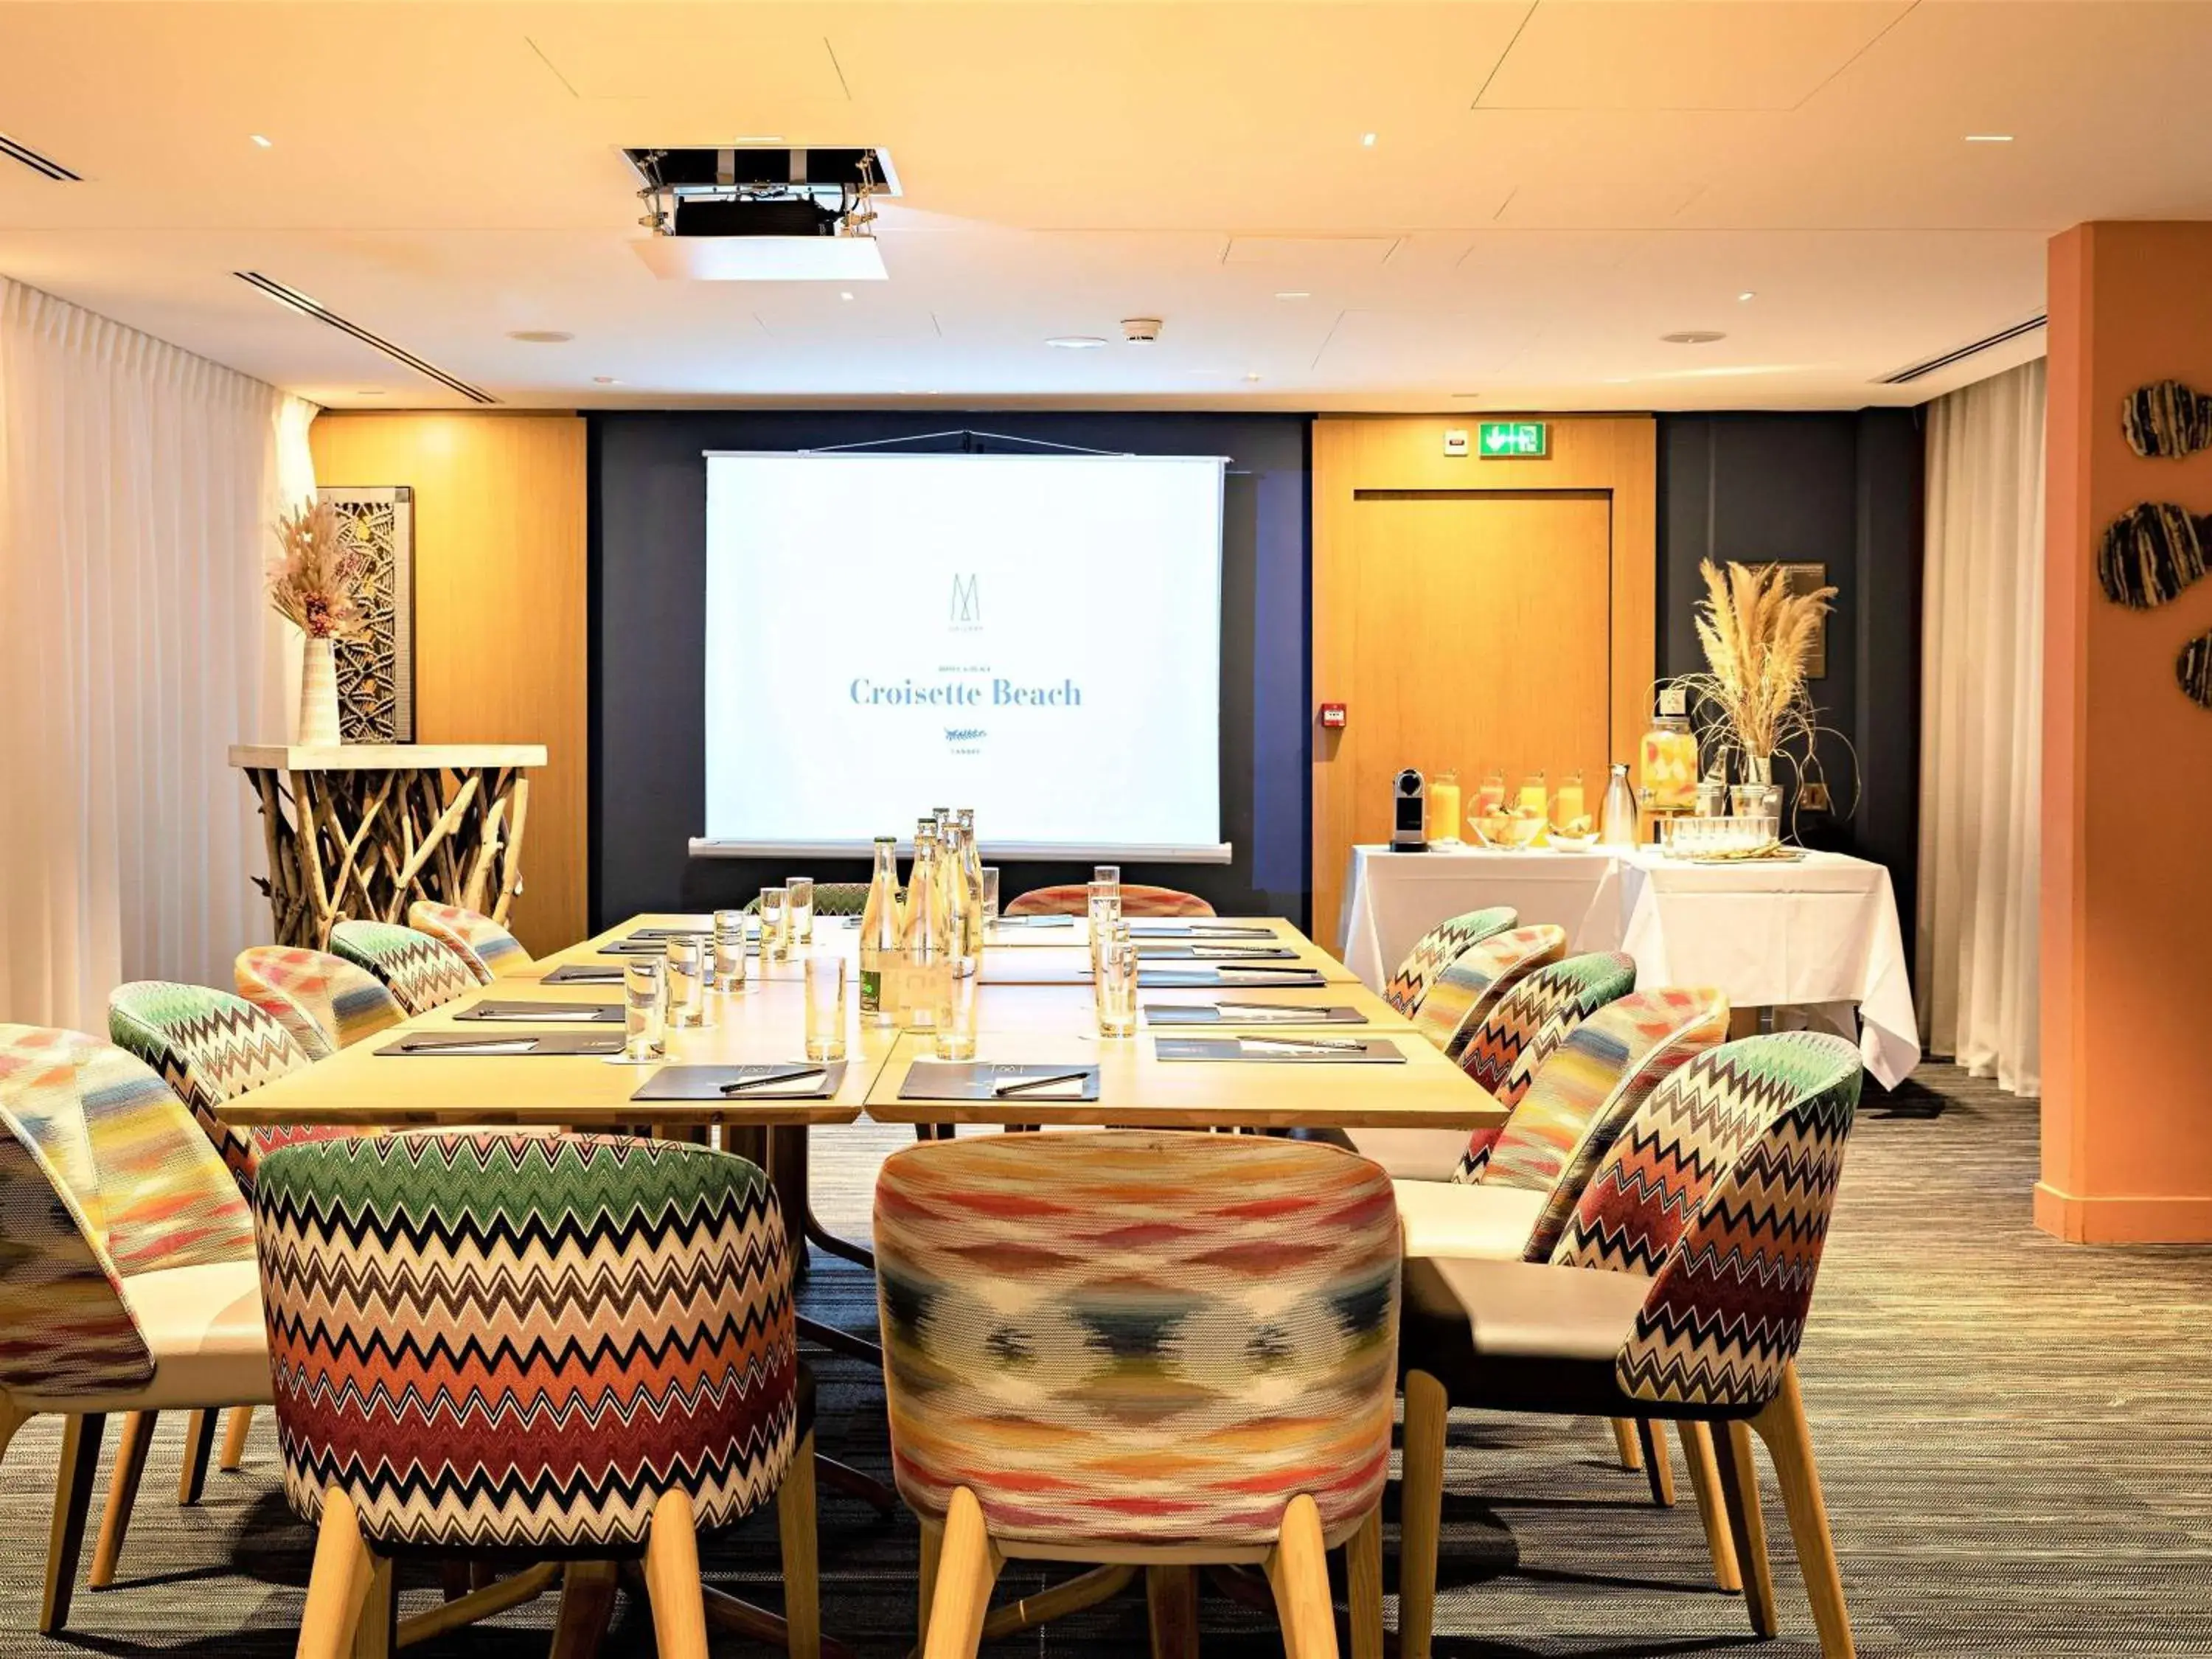 Meeting/conference room in Hotel Croisette Beach Cannes Mgallery